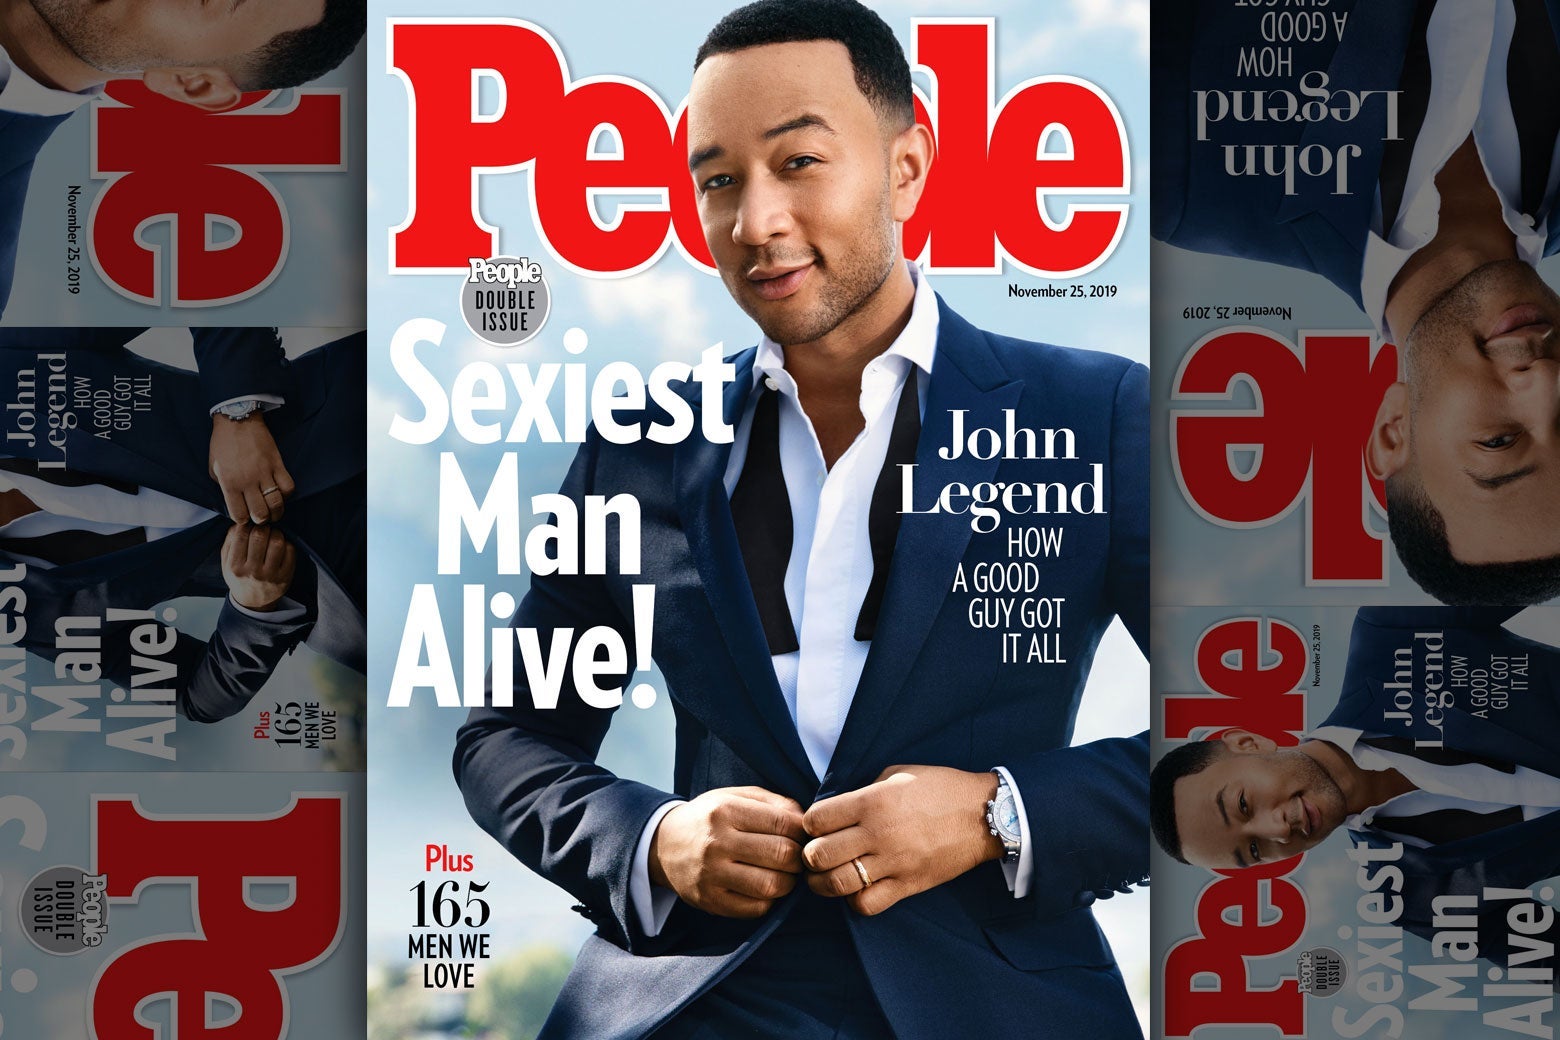 John Legend as Sexiest Man Alive on the cover of People magazine.